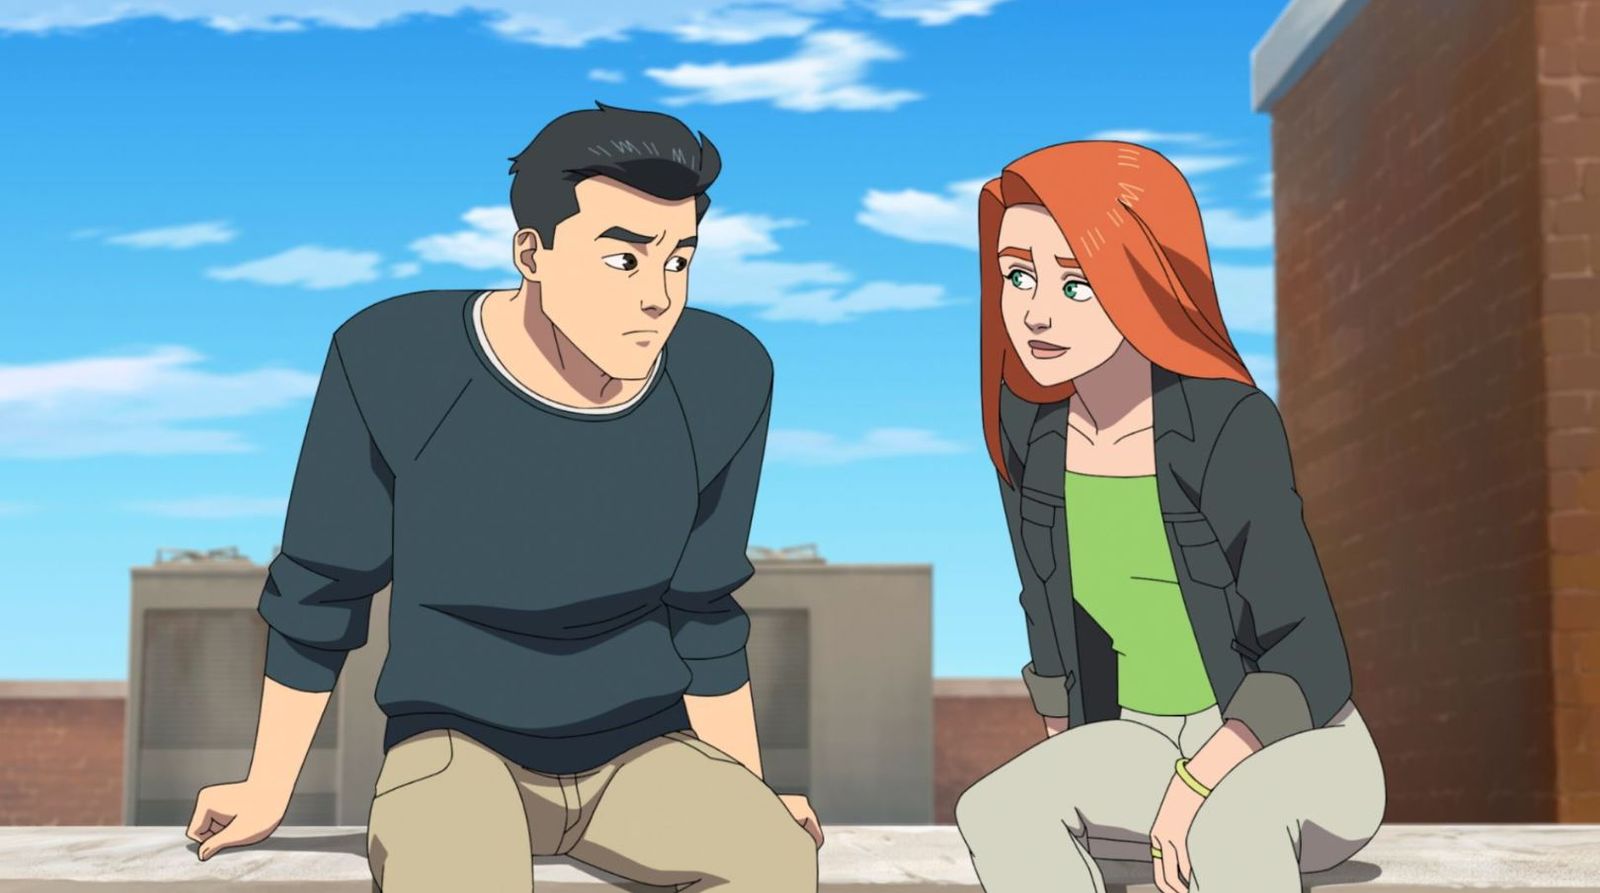 Mark and Eve talking on a rooftop in Invincible season 2